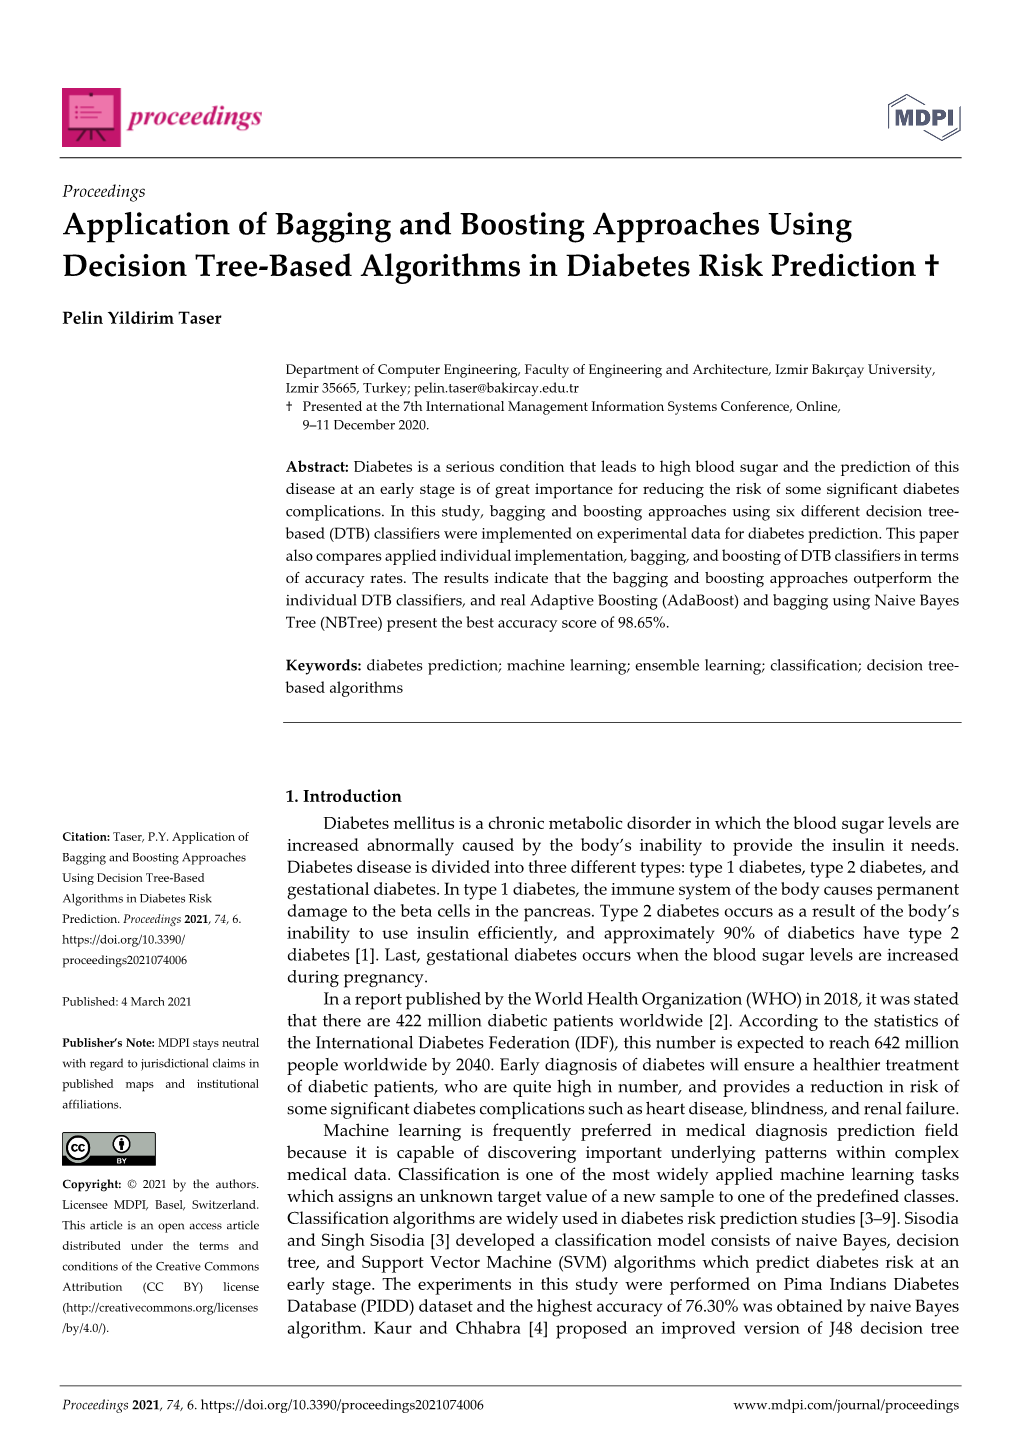 Application of Bagging and Boosting Approaches Using Decision Tree-Based Algorithms in Diabetes Risk Prediction †